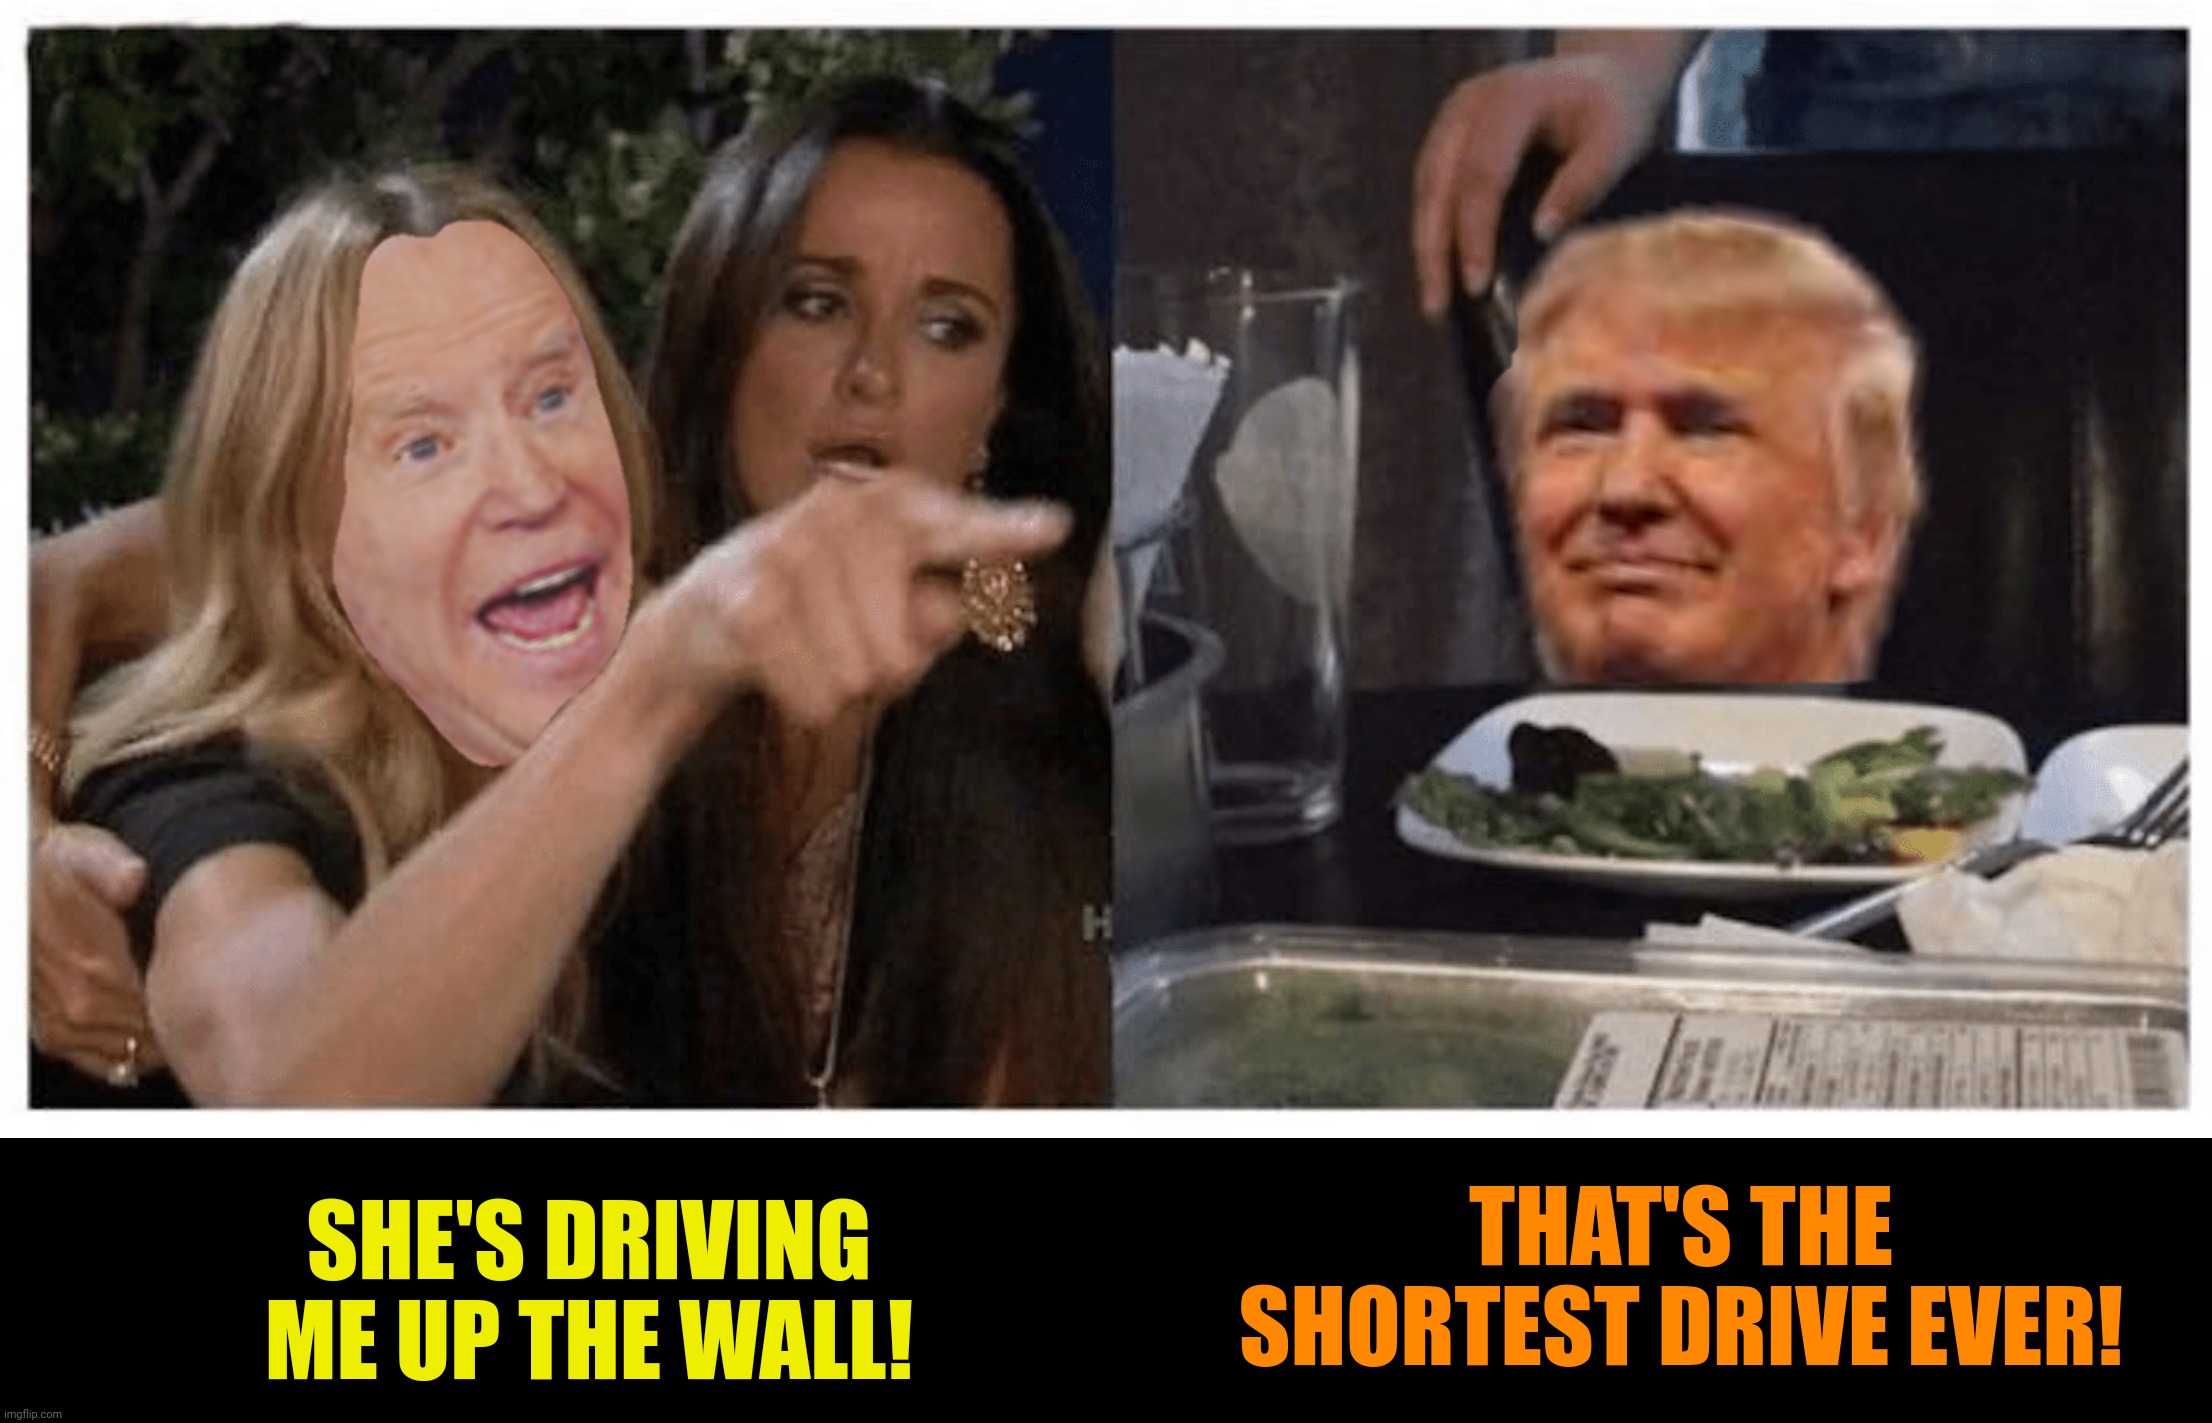 SHE'S DRIVING ME UP THE WALL! THAT'S THE SHORTEST DRIVE EVER! | made w/ Imgflip meme maker